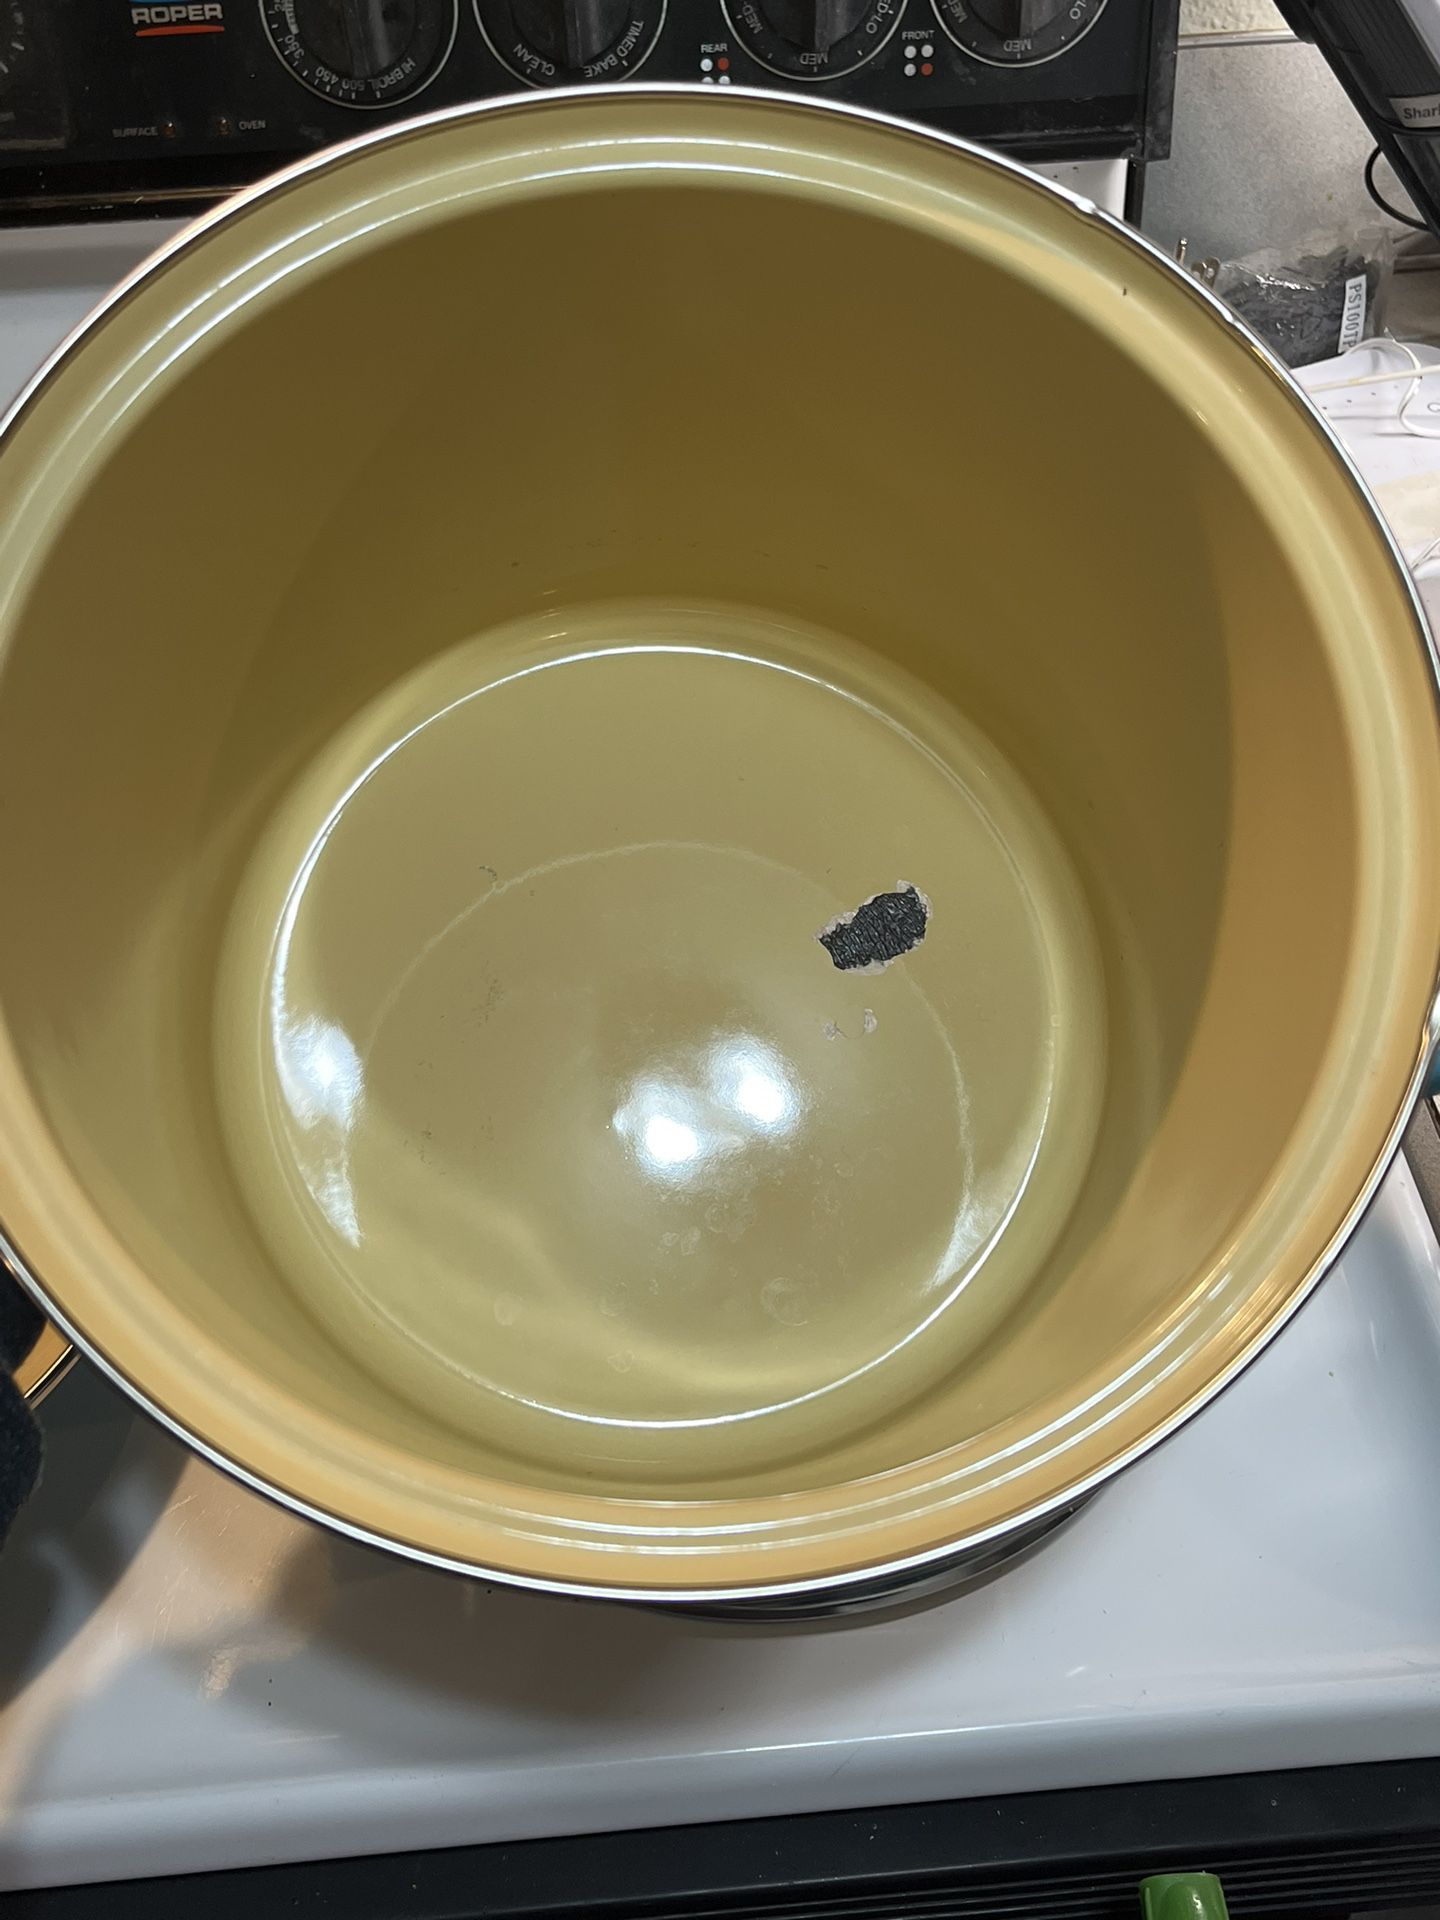 Le Creuset 8 Quart Stock Pot for Sale in Federal Way, WA - OfferUp